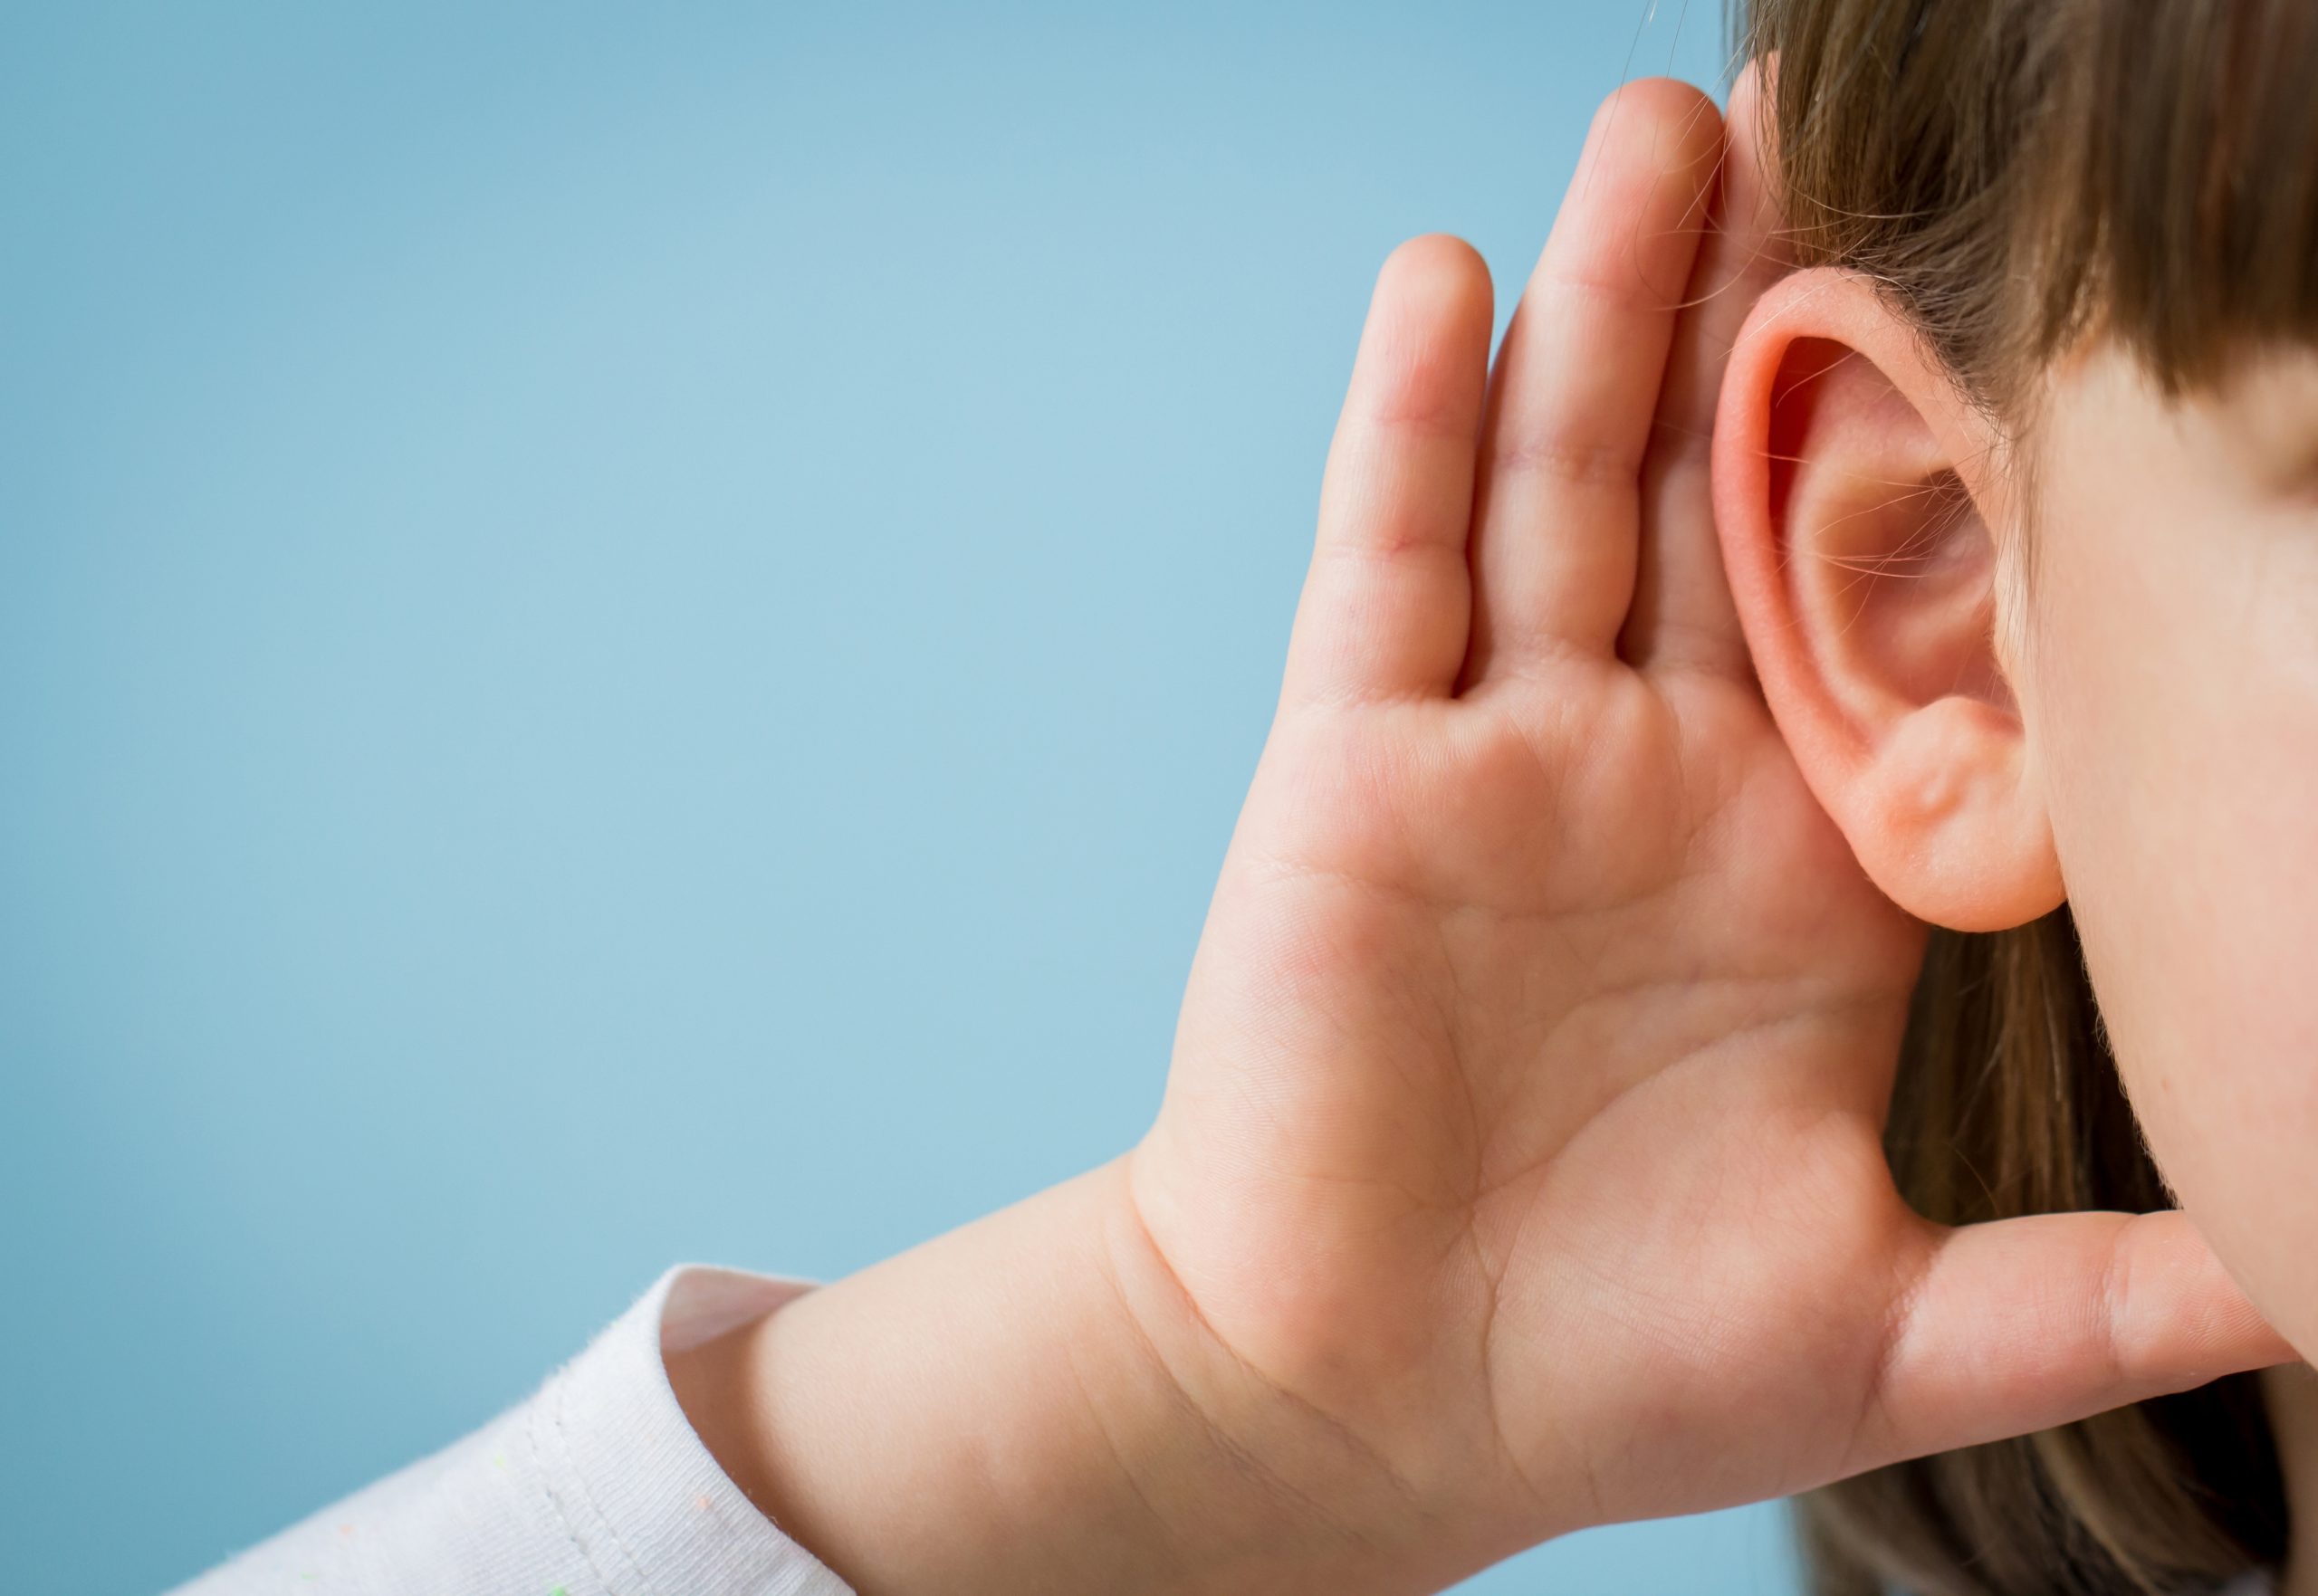 What are the common symptoms of hearing loss?